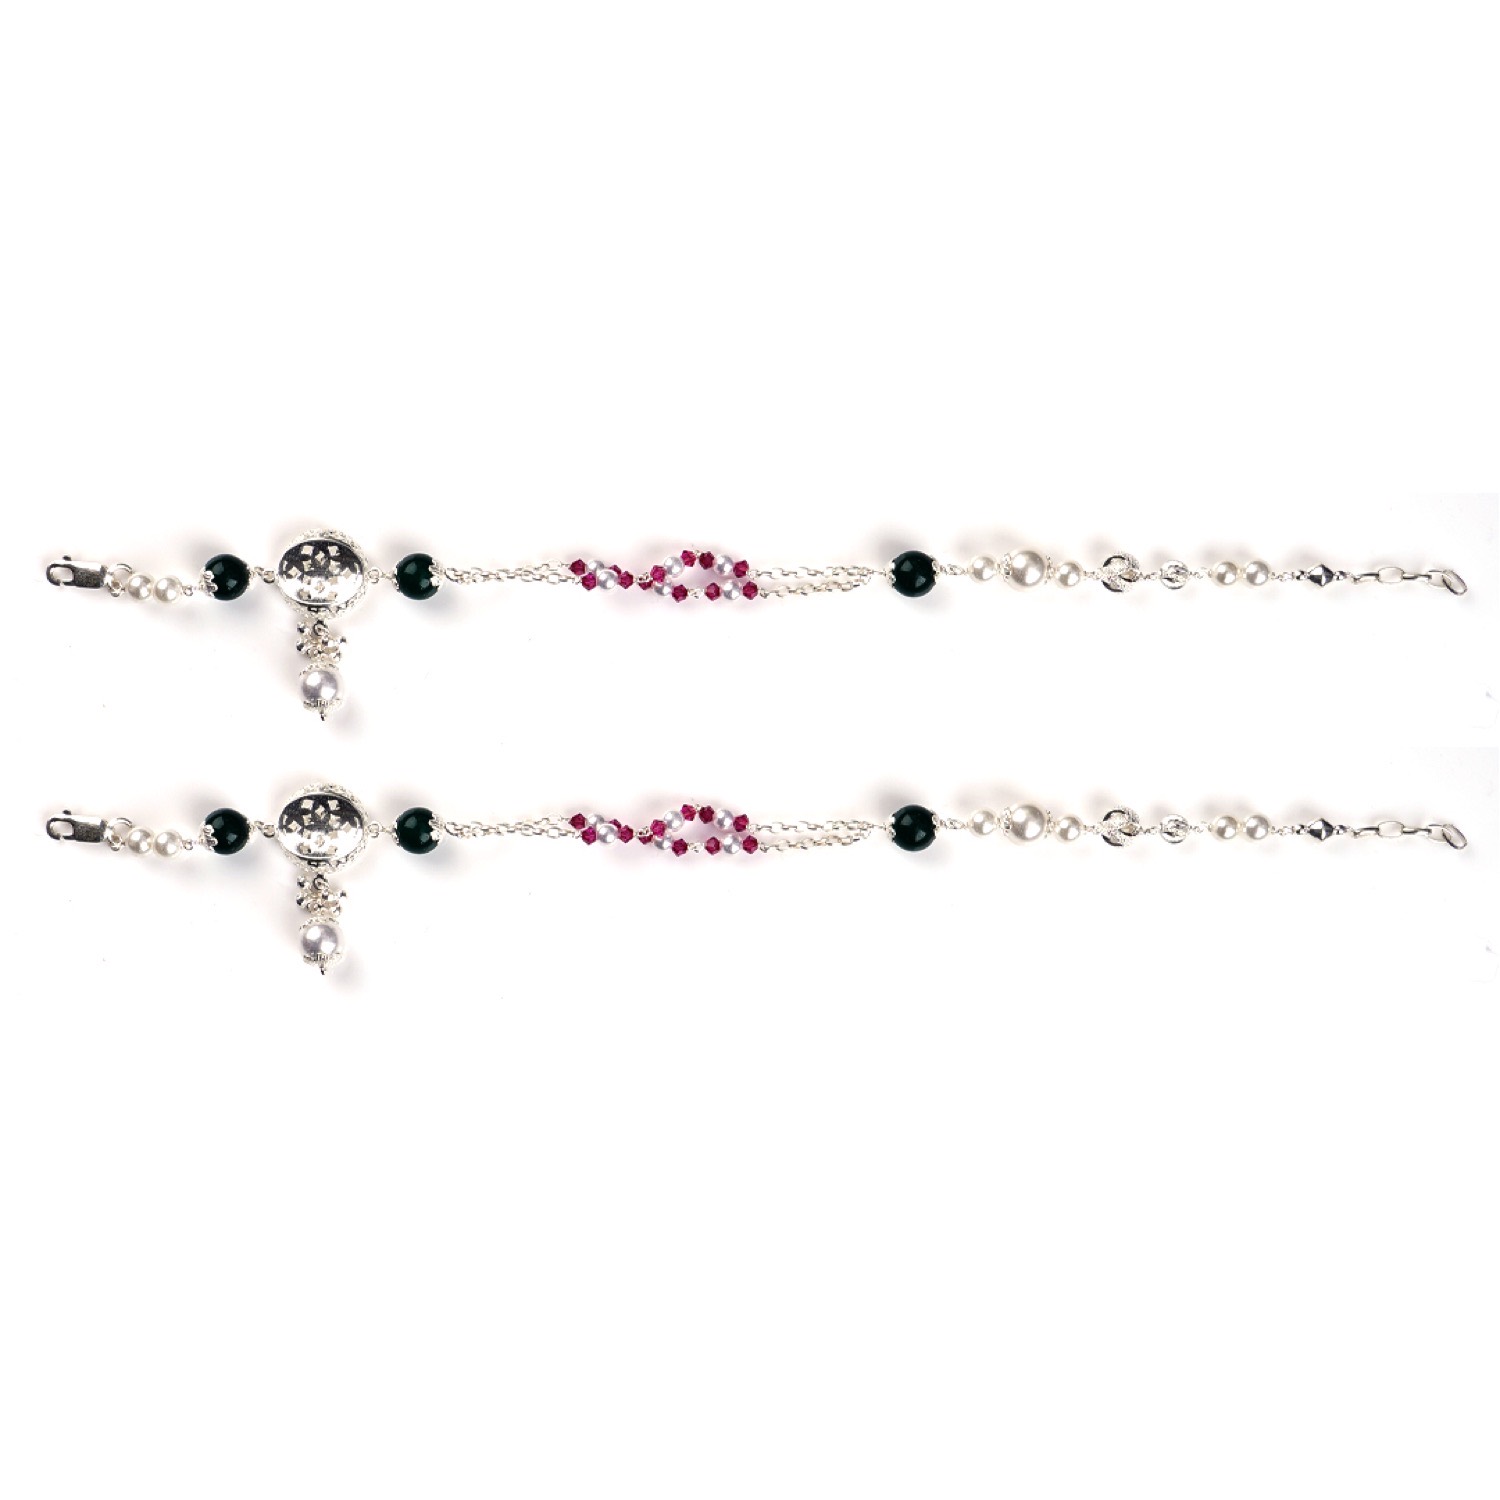 varam_anklets_072022_white_and_baby_pink_stone_silver_anklets_100-1